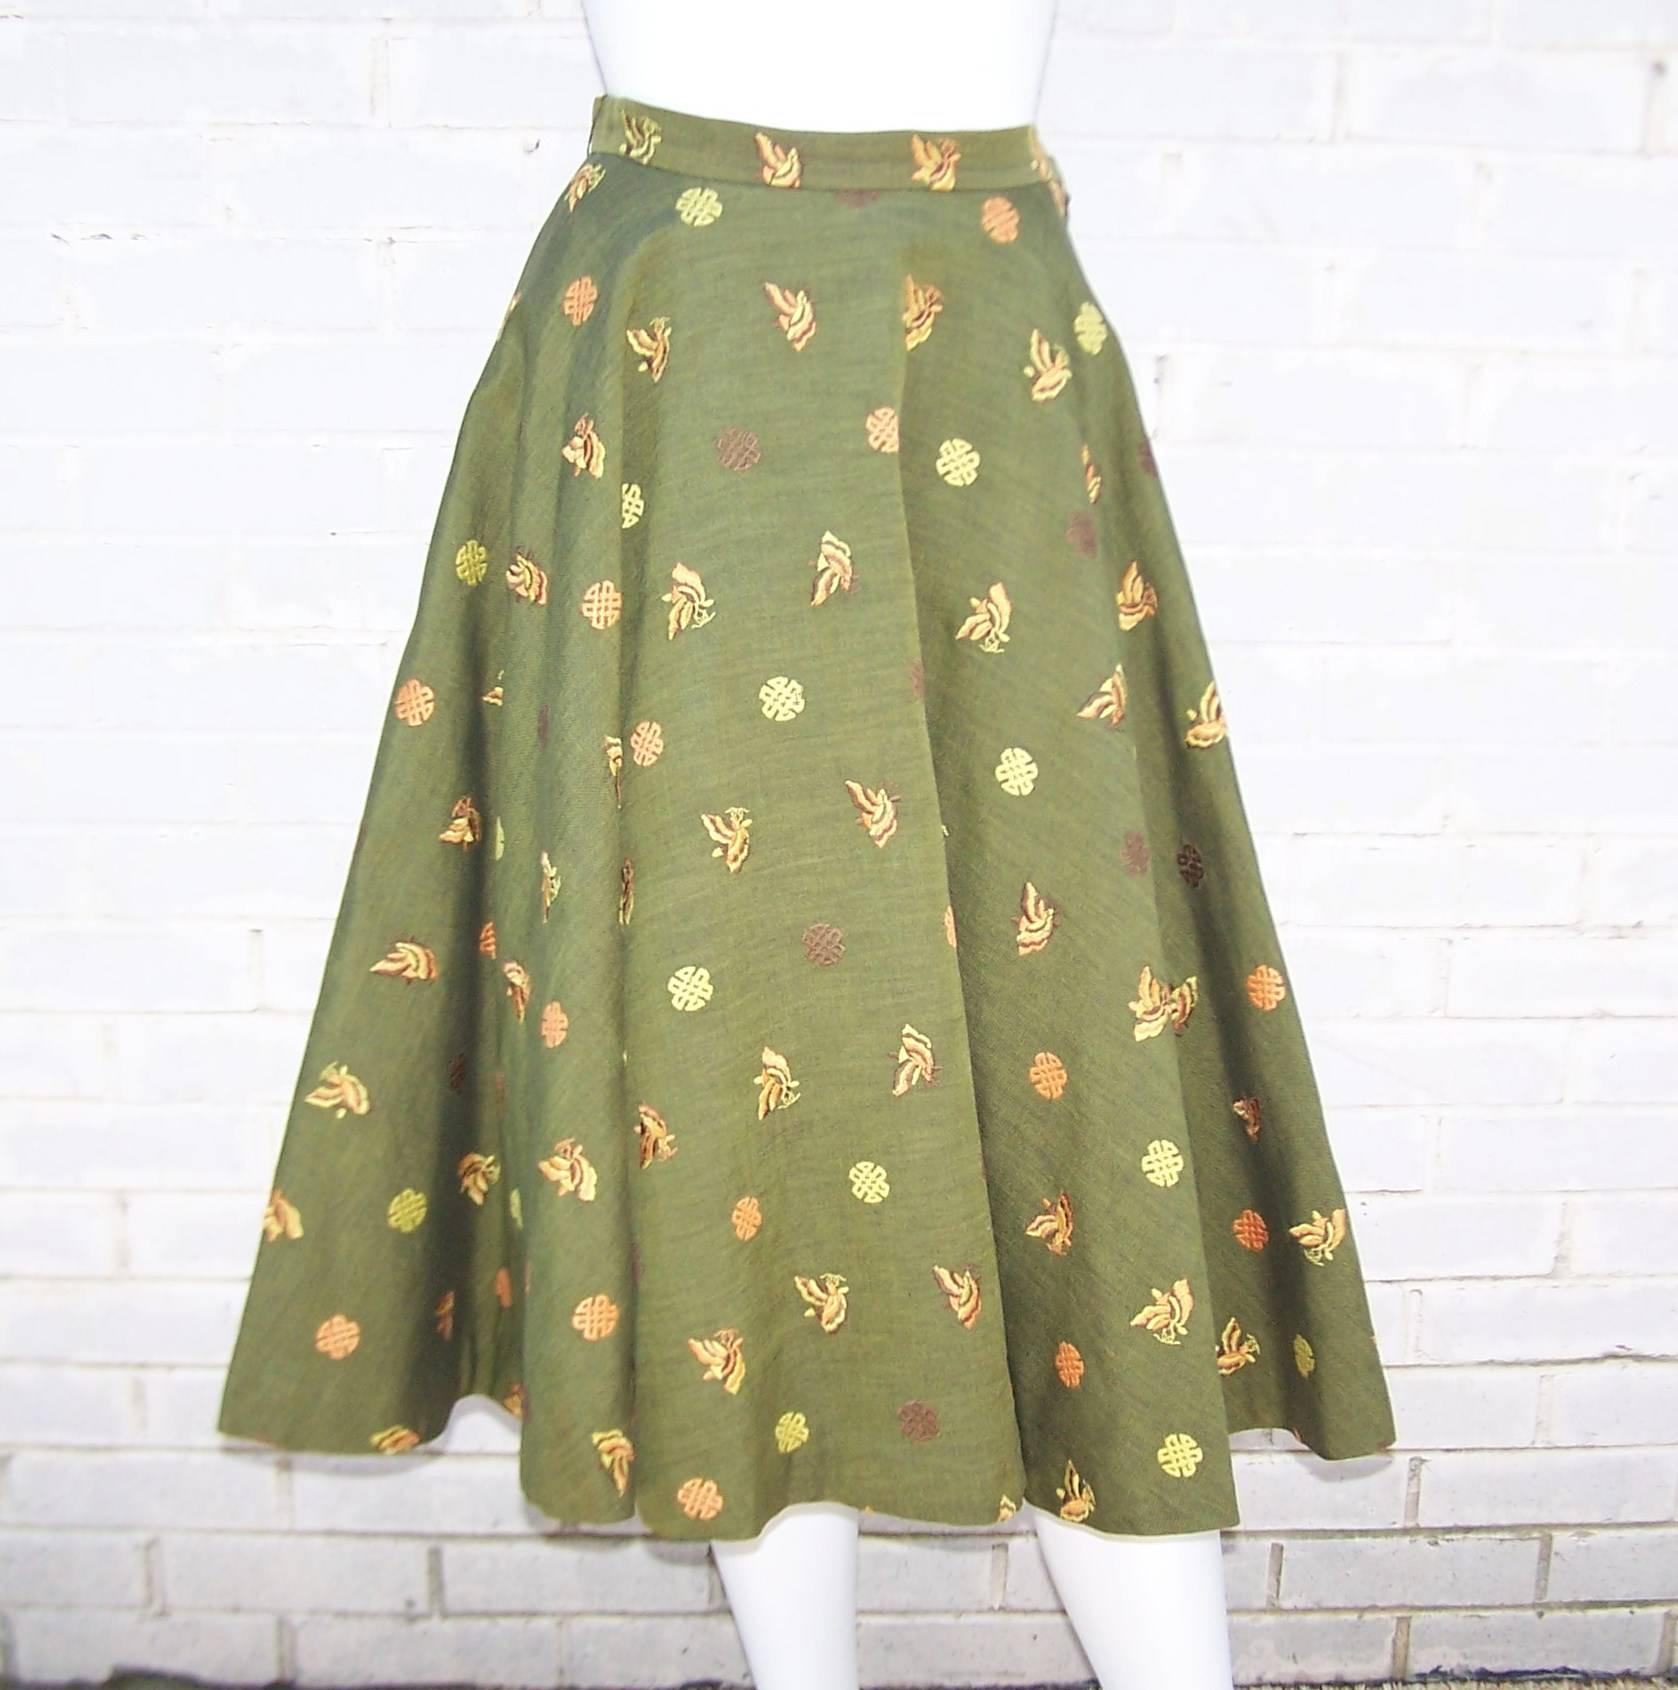 Sweet 1950's circle skirt with cinched waistband and an Asian inspired print on an army green linen blend fabric.  The skirt hooks and and zips at the side with a natural linen backing to the fabric which creates volume and weight to the skirt. 